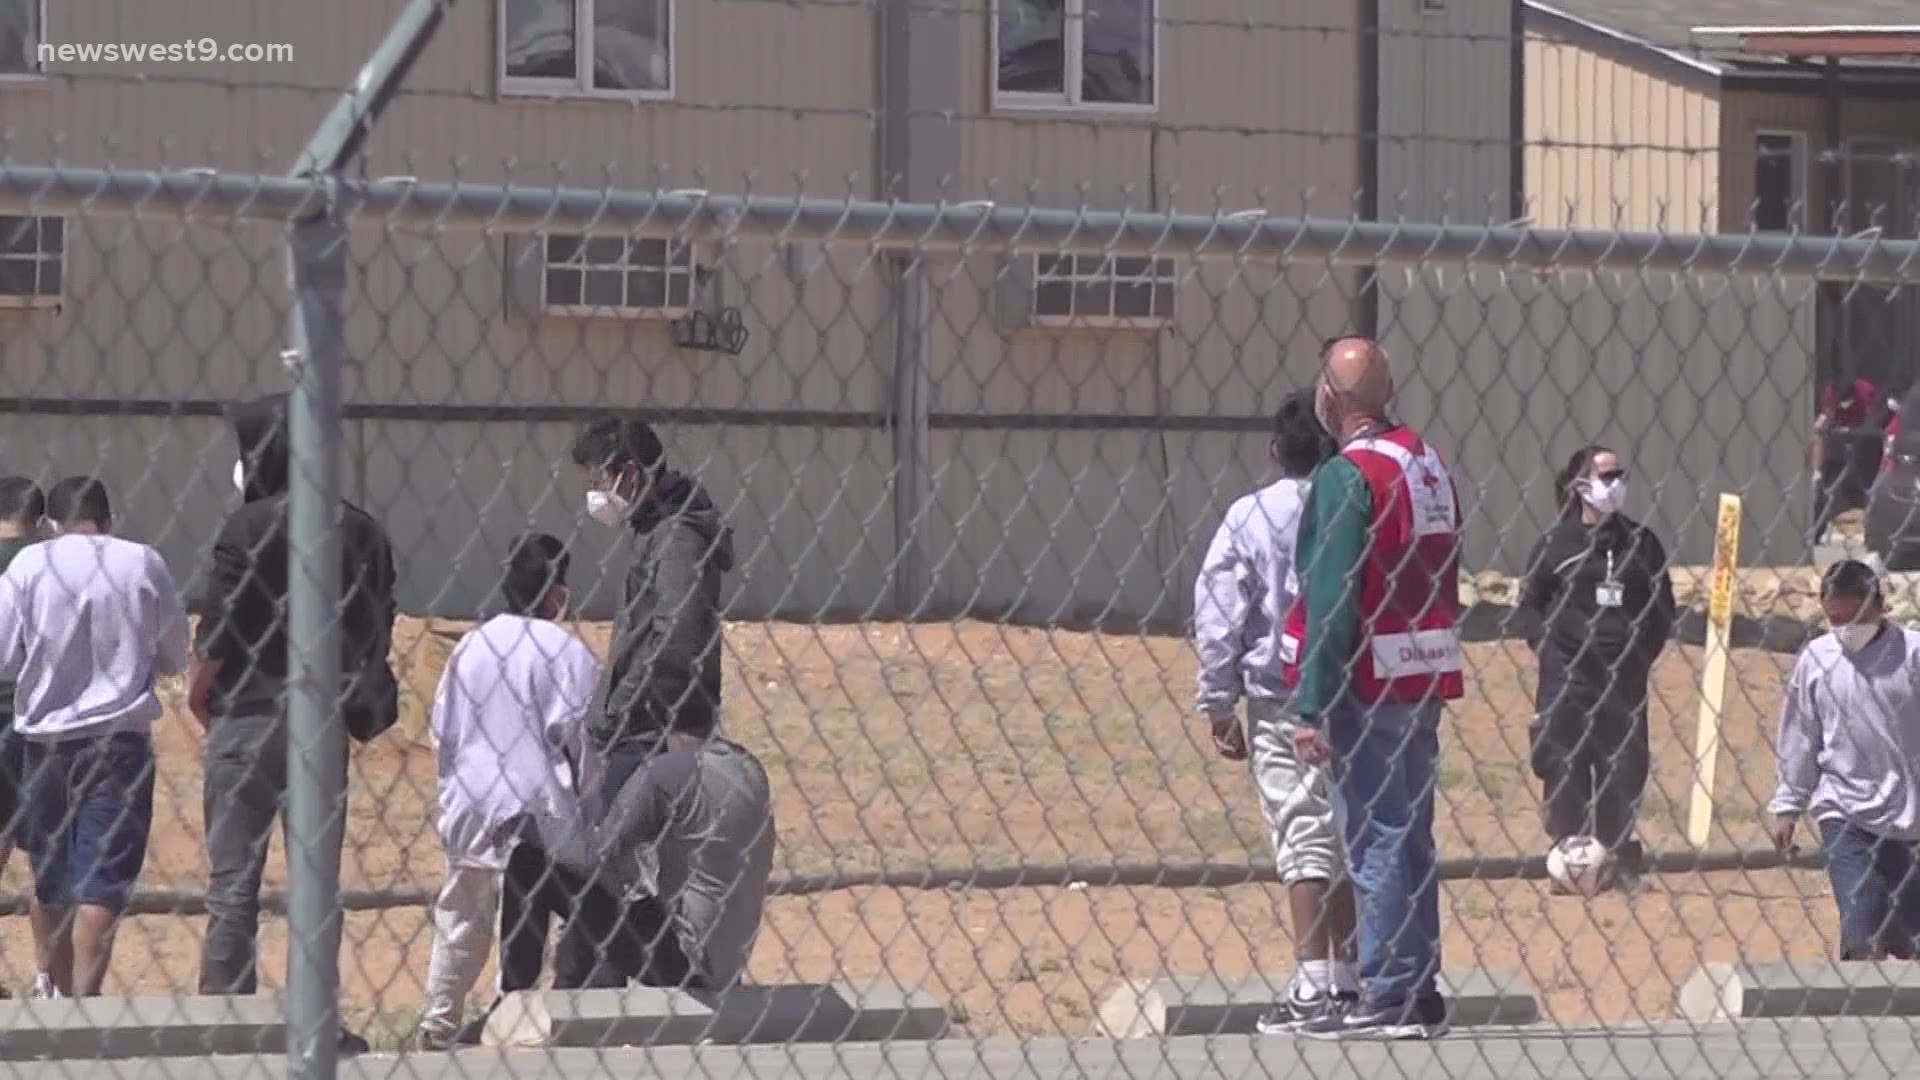 Migrant kids between the ages of 5 and 12 are expected to get to the Midland facility soon.